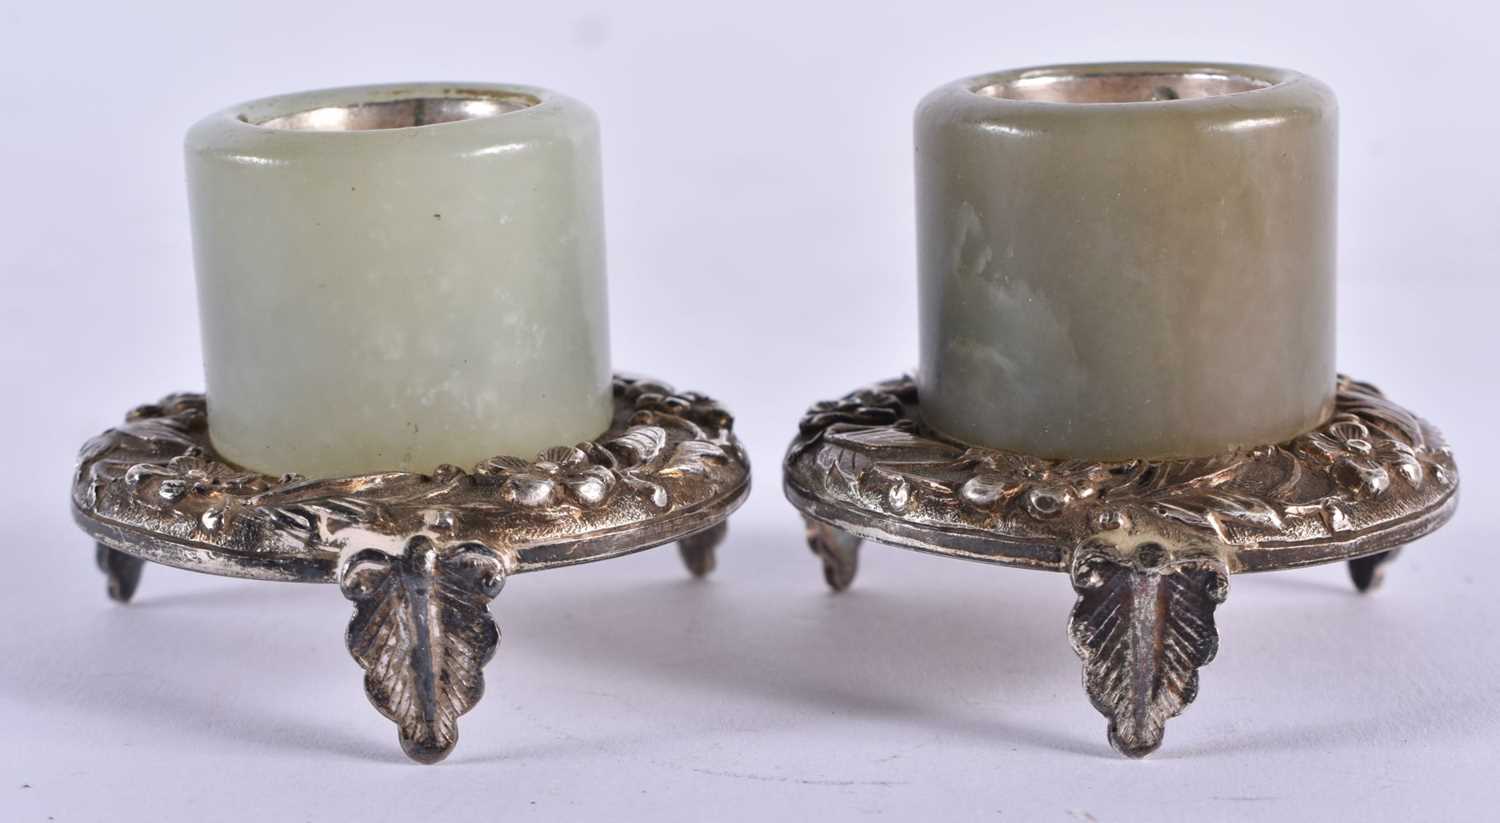 A PAIR OF CHINESE QING DYNASTY JADE ARCHERS RINGS. 103 grams. 5 cm x 4 cm. - Image 2 of 4